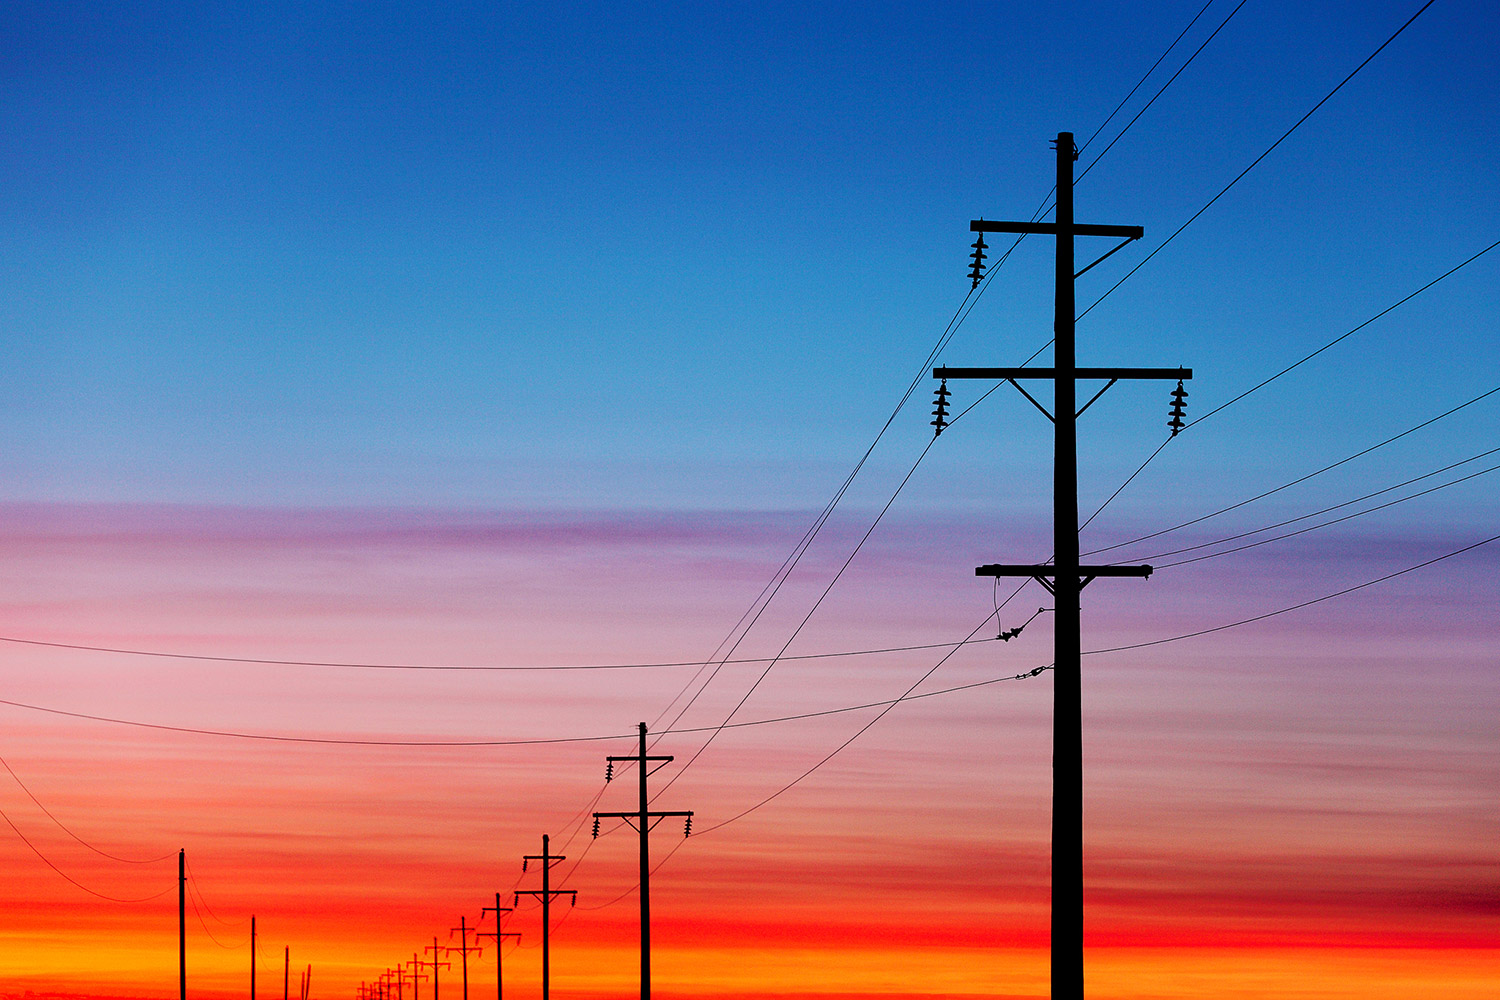 The sunrise to the ease silhouettes this row of electrical poles and power lines near Fairfield, Montana.&nbsp;→ Buy a Print